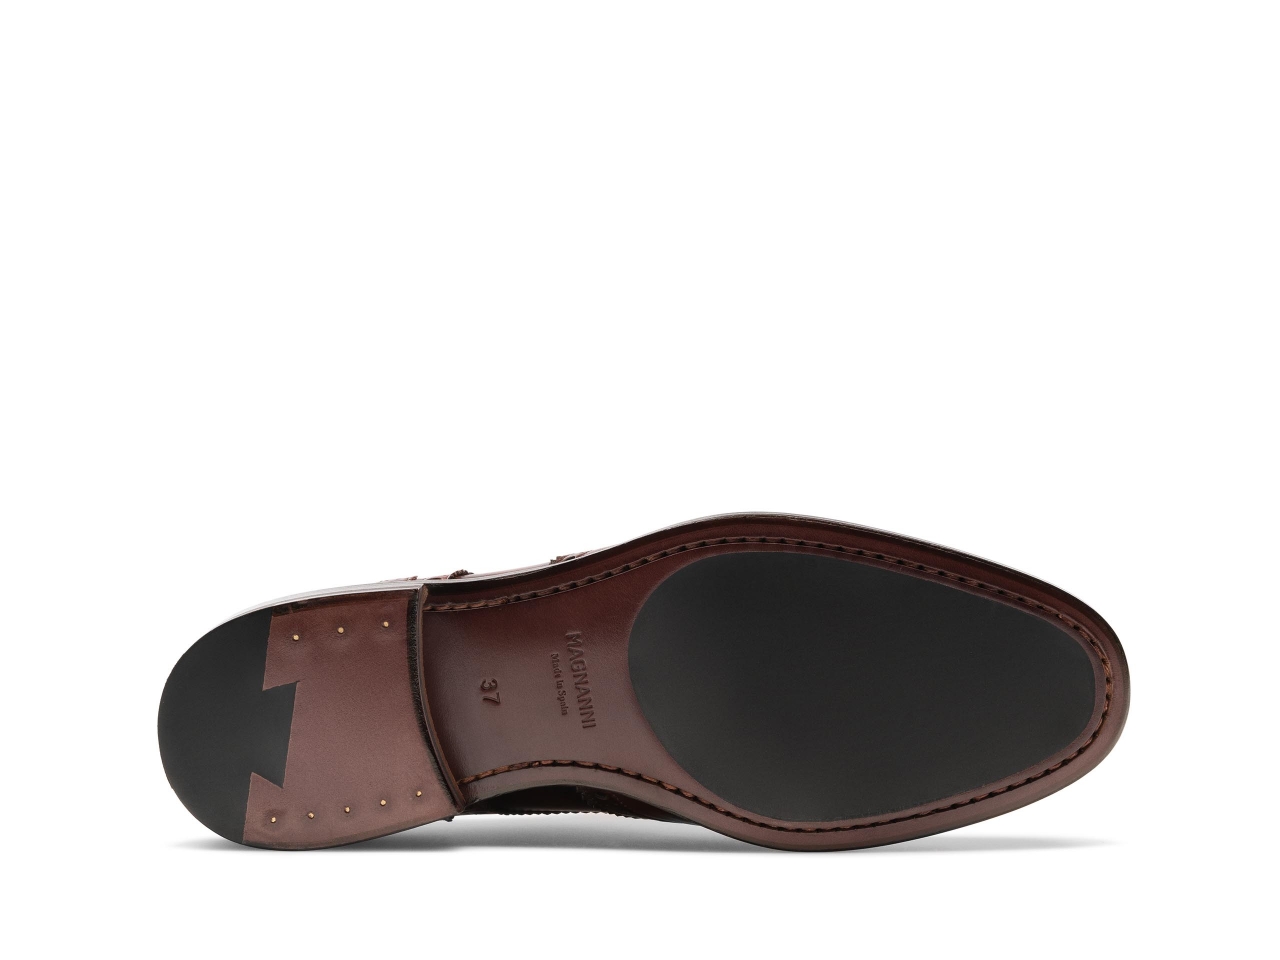 Sole of the Mariana Cognac / Midbrown / Red